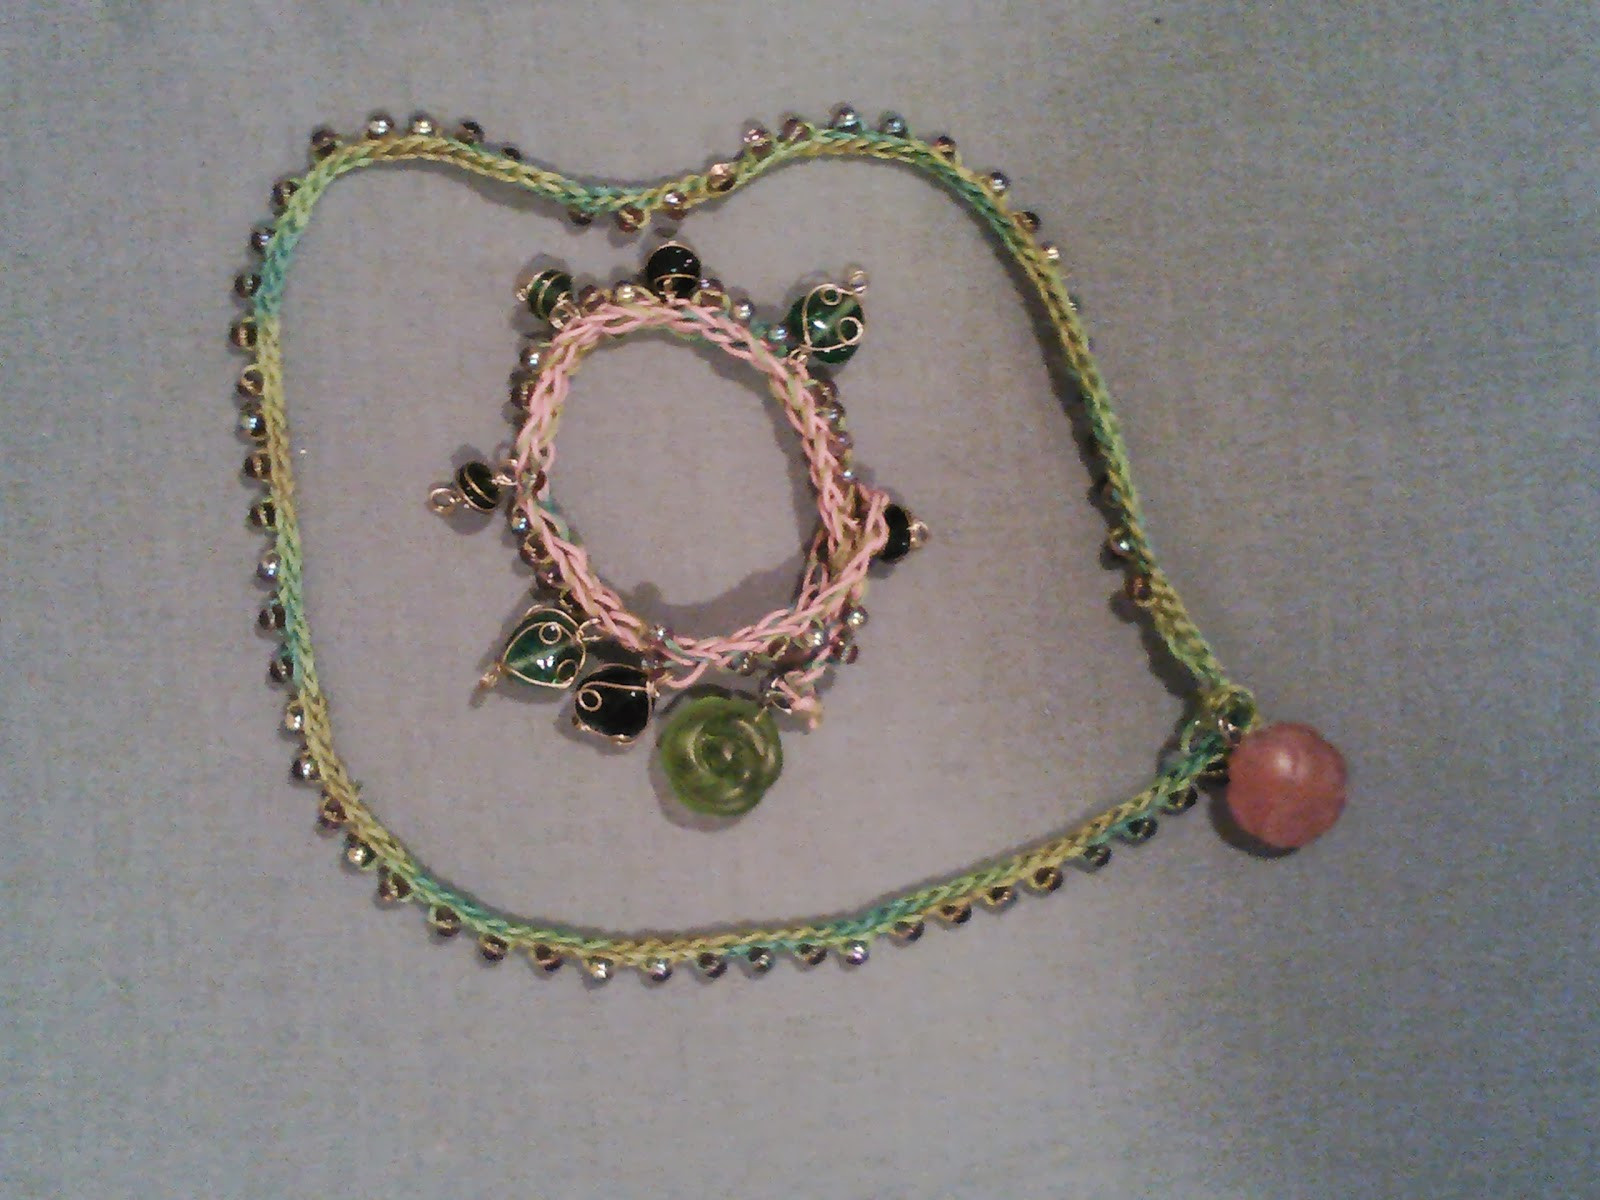 Twitches Necklace For Sale
 Twitches Necklaces I made a necklace and wrap